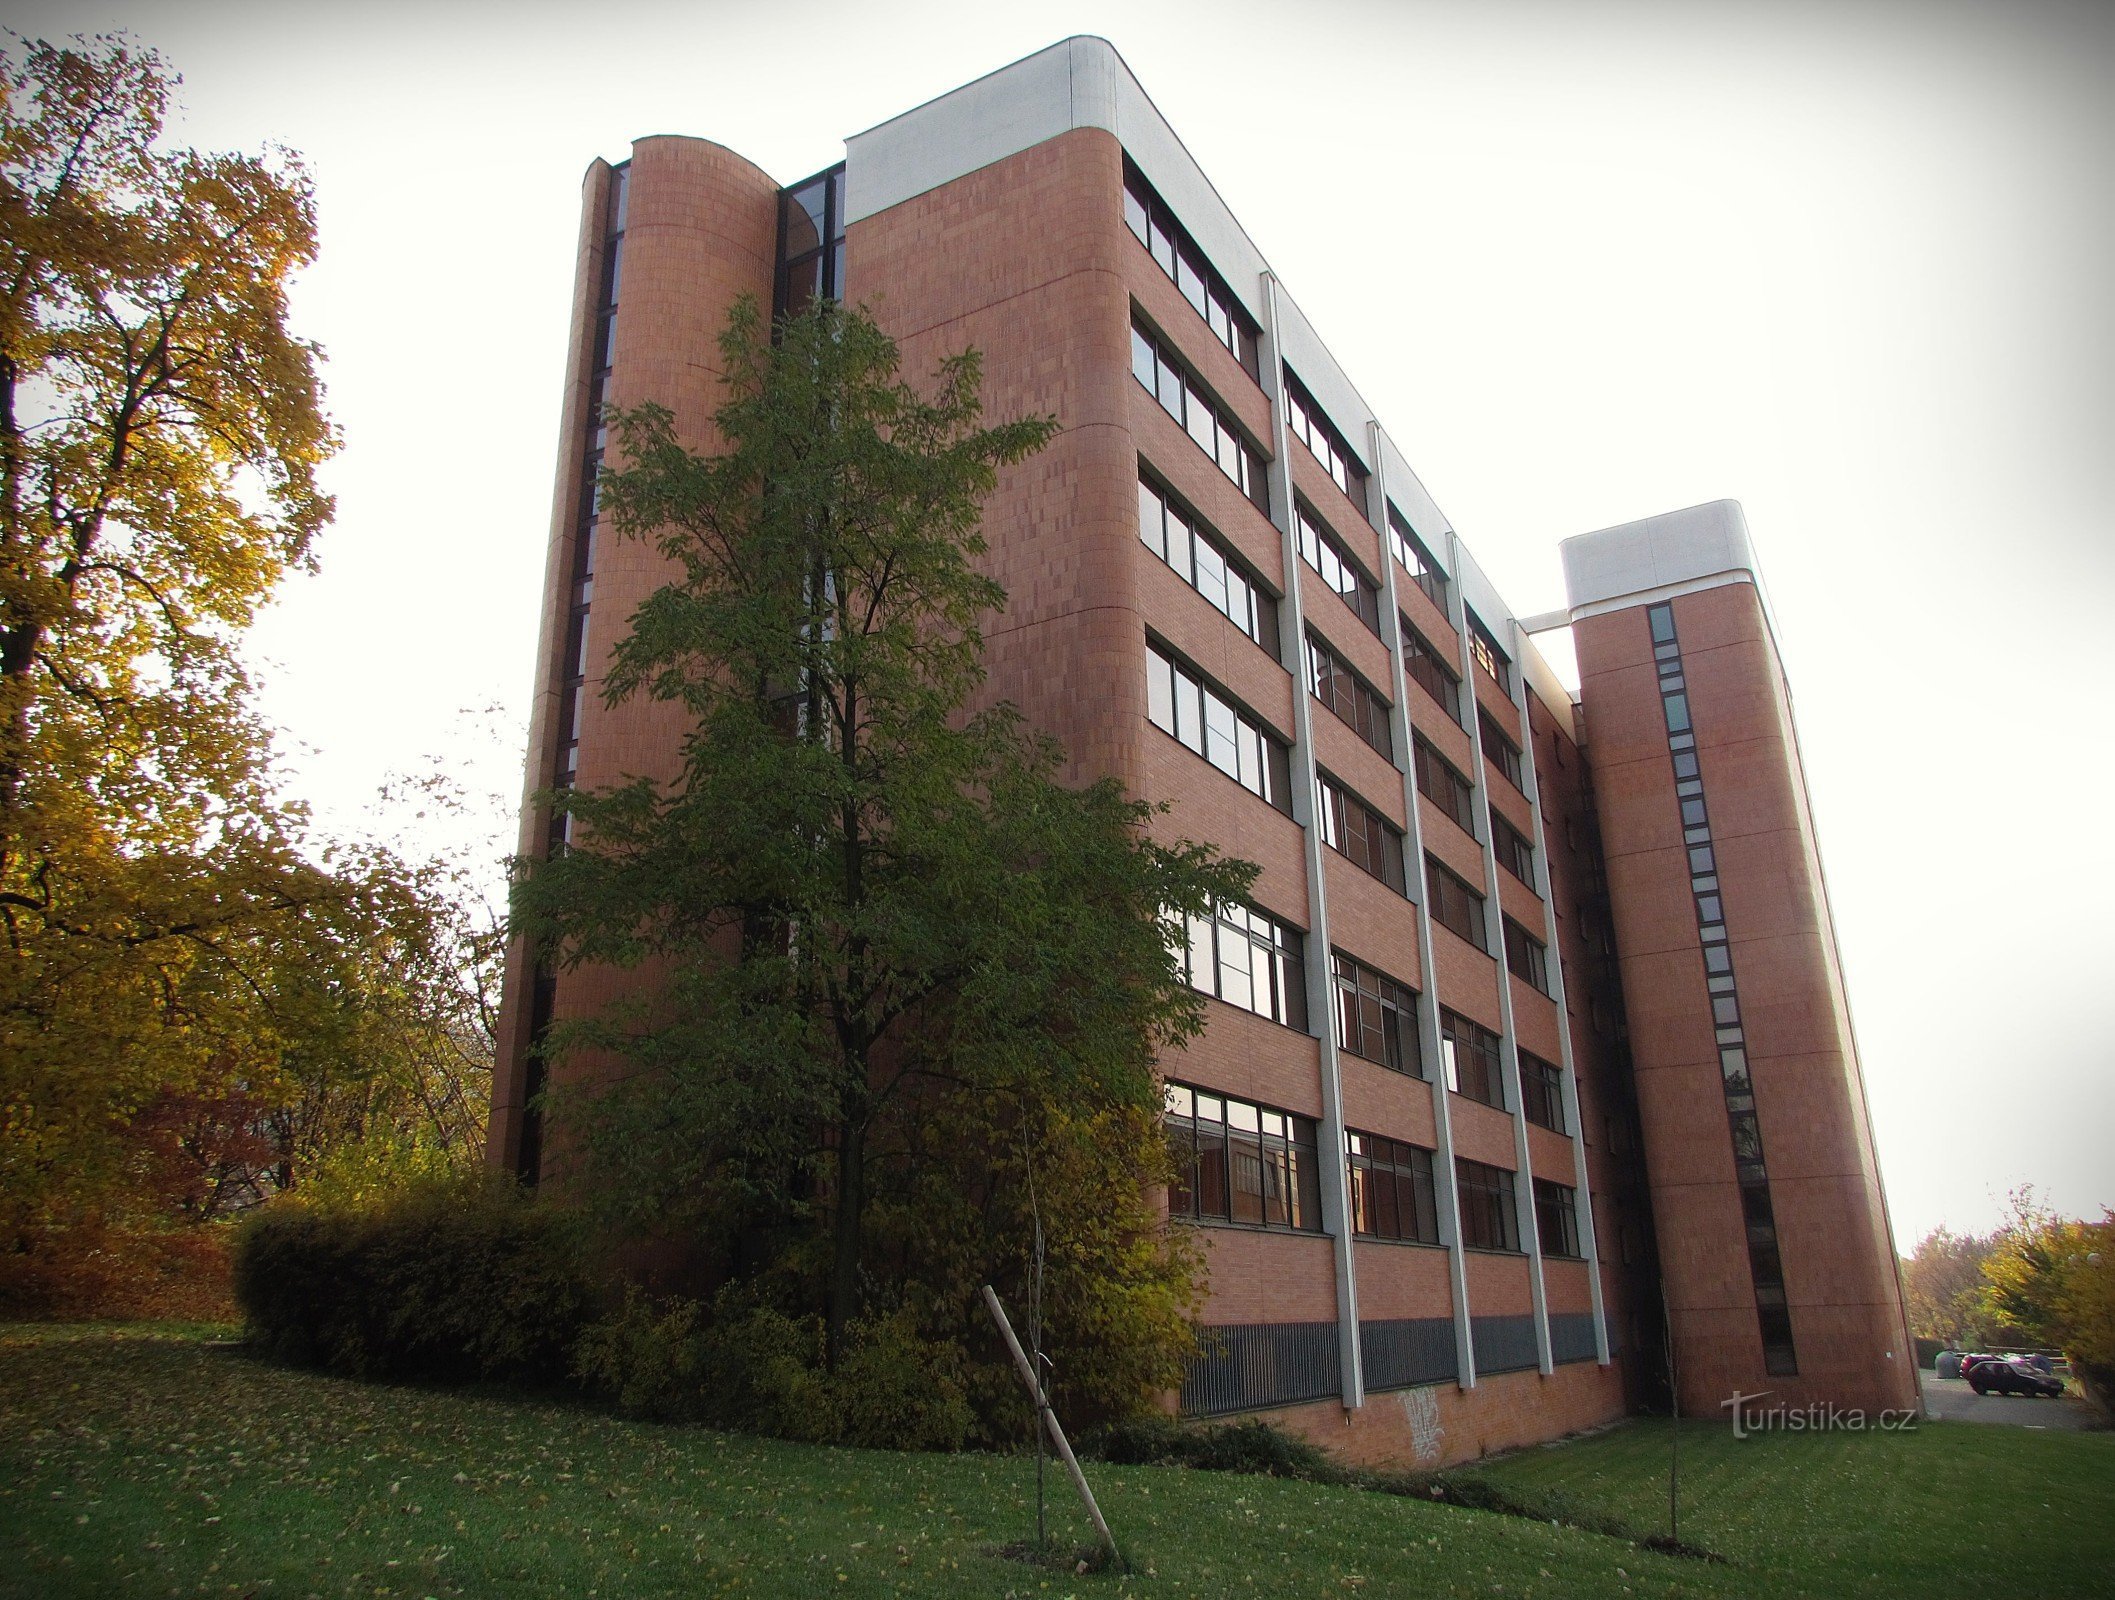 Zlín - building of the Faculty of Management and Economics